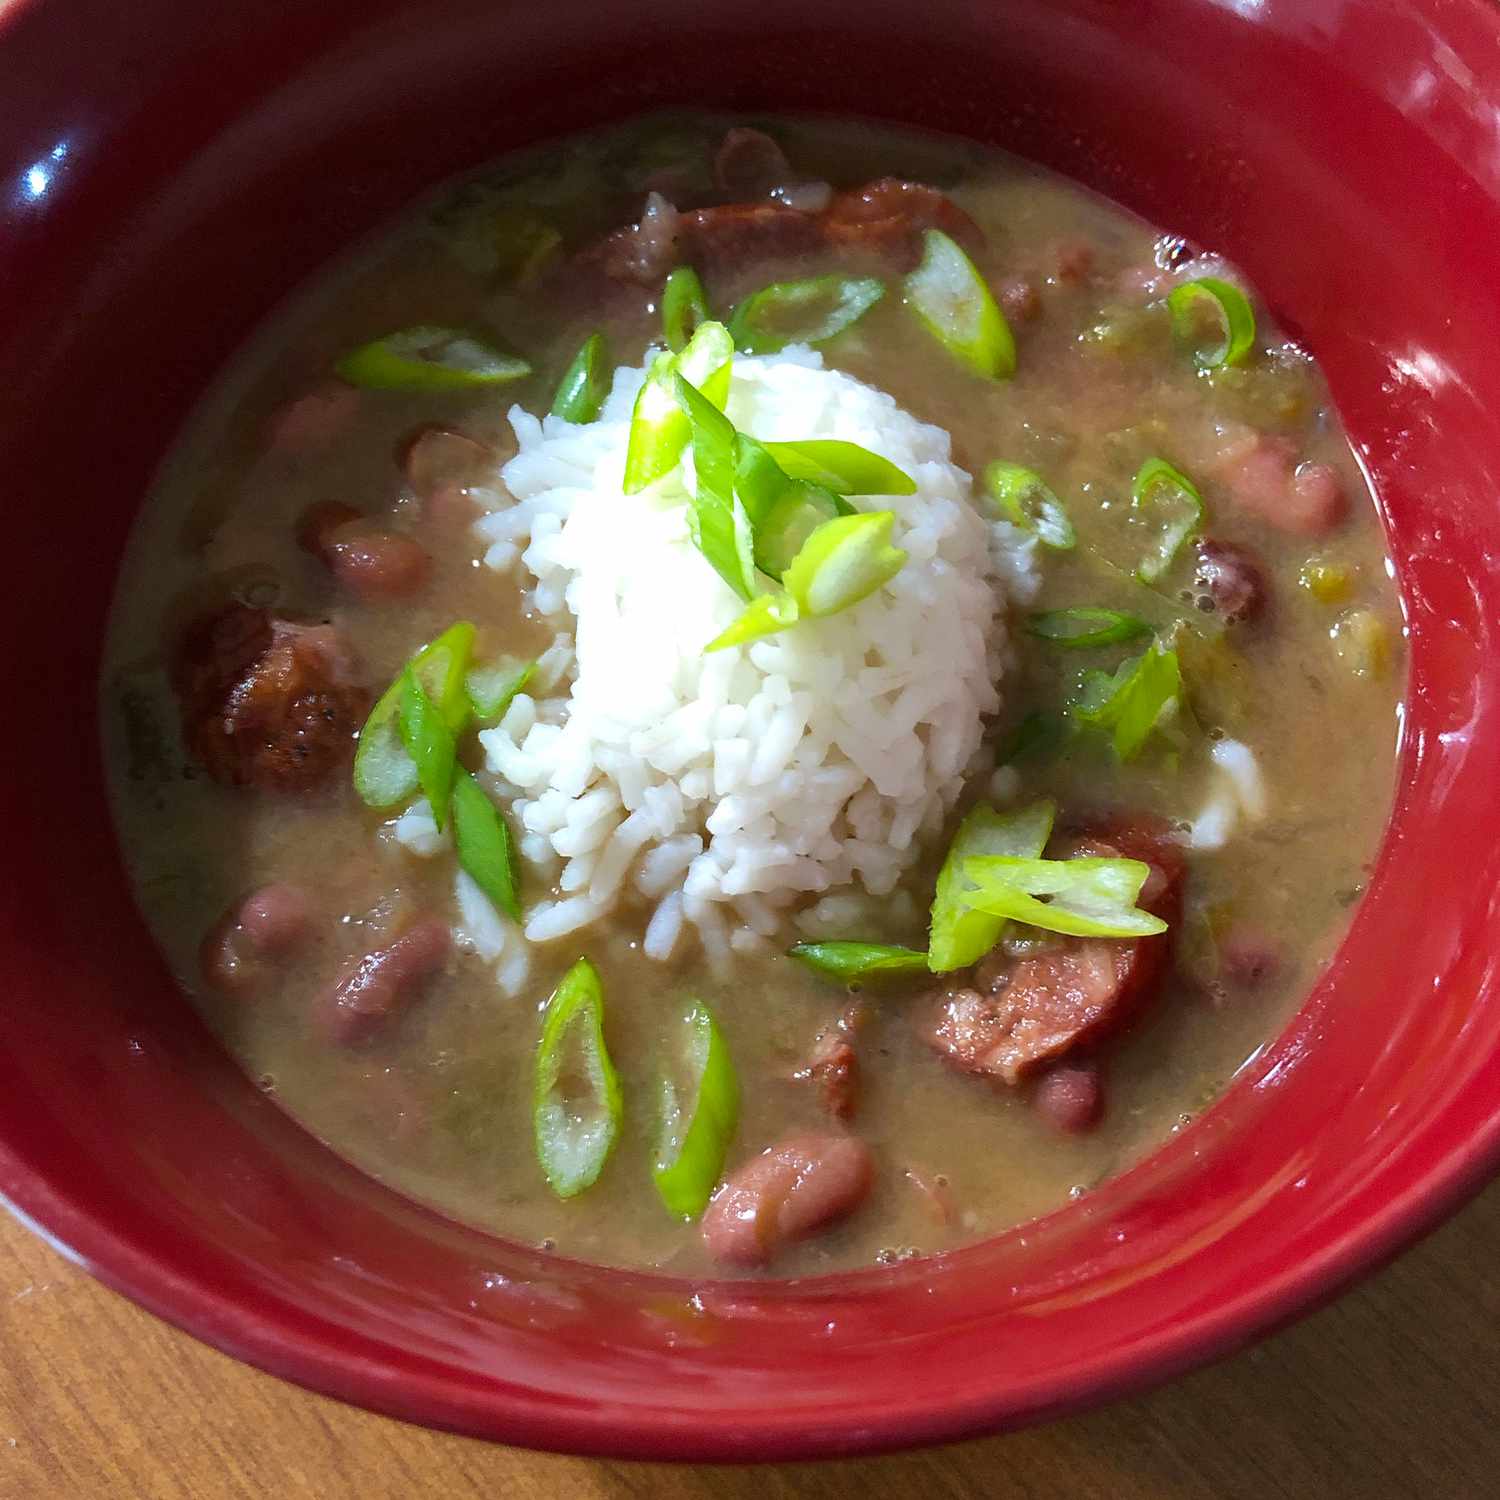 close up view of Red Beans and Rice garnished with green beans in a red bowl